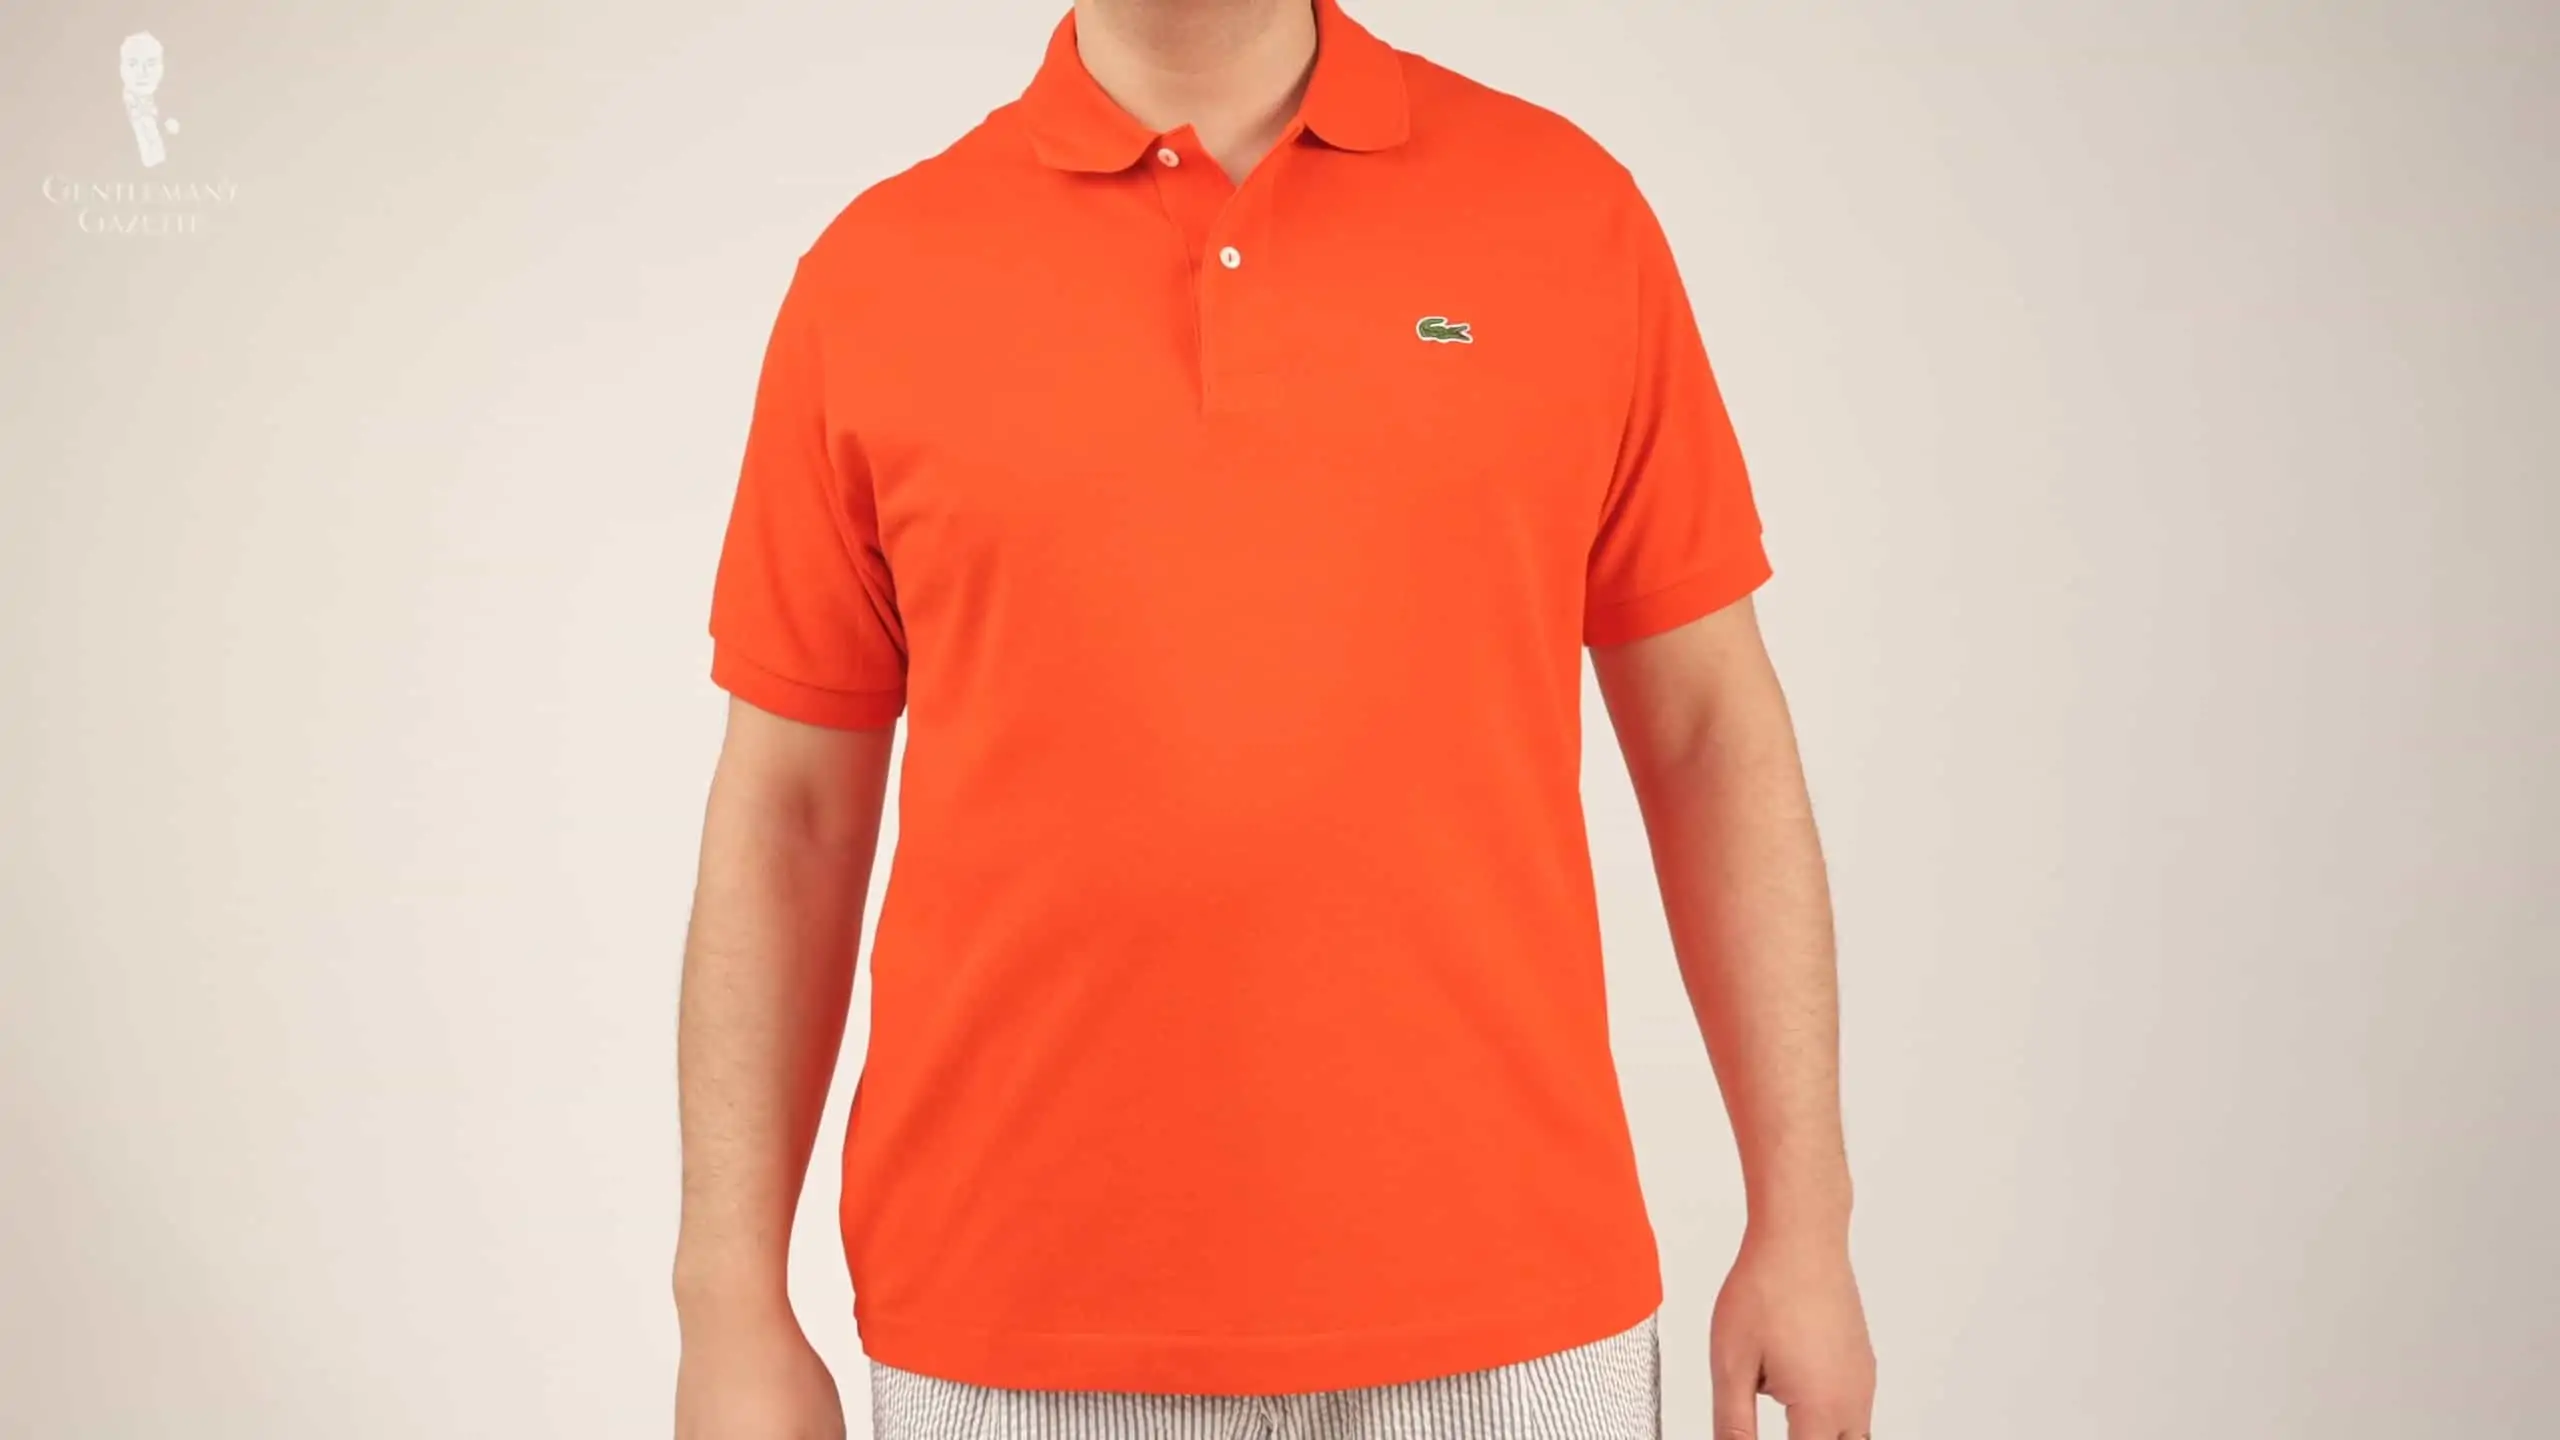 Interaktion tempo Utilfreds Lacoste Polo Shirt: Is It Worth It? (In-Depth Review)